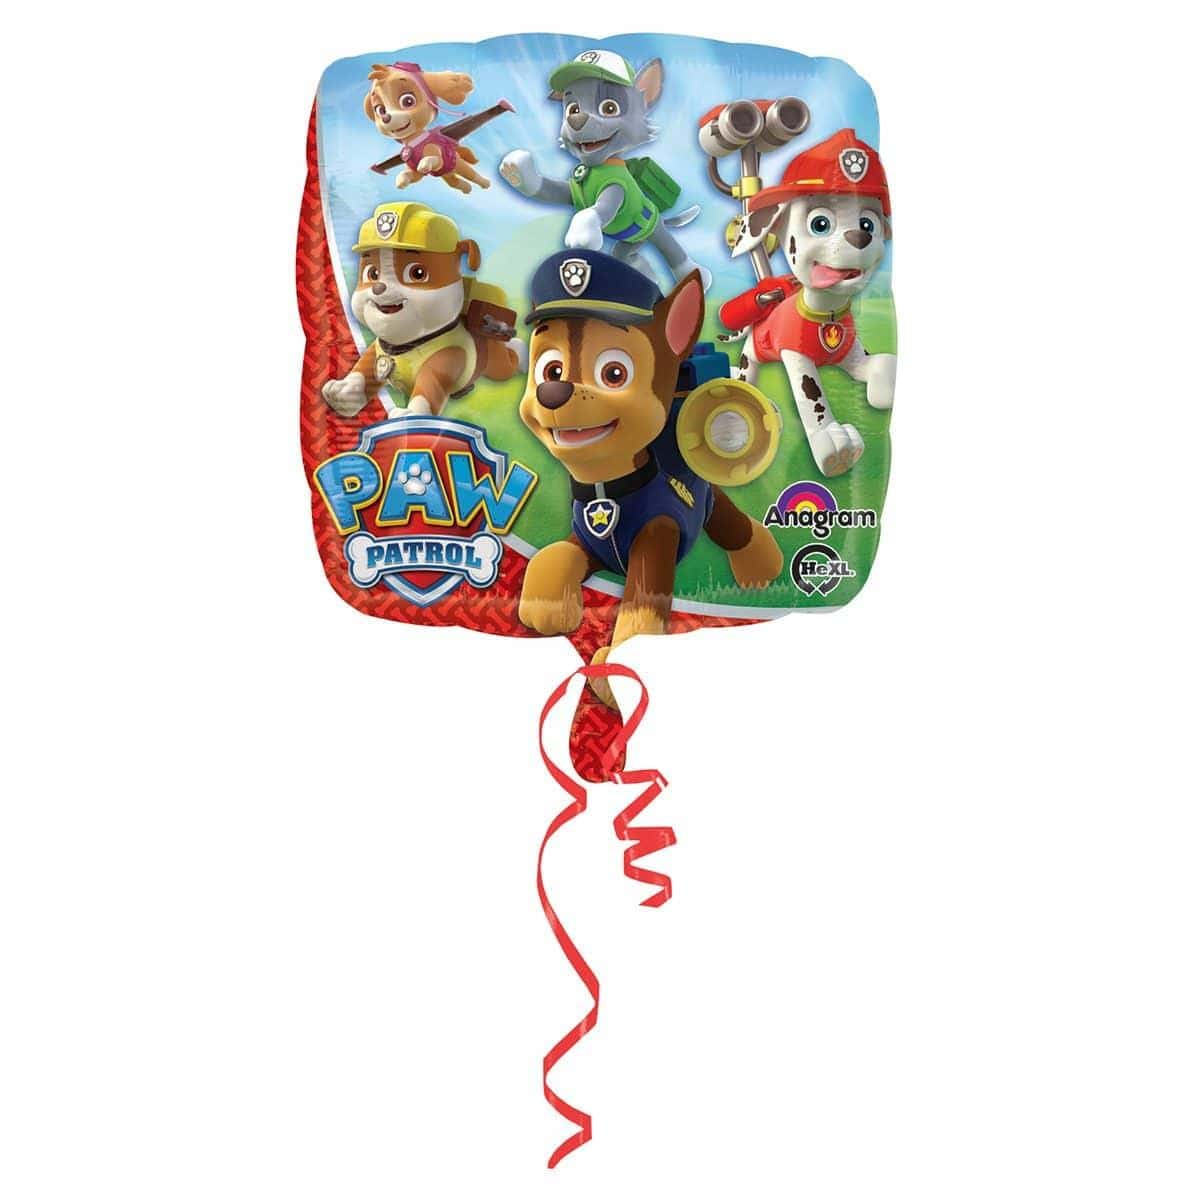 Buy Balloons Paw Patrol Foil Balloon, 18 Inches sold at Party Expert